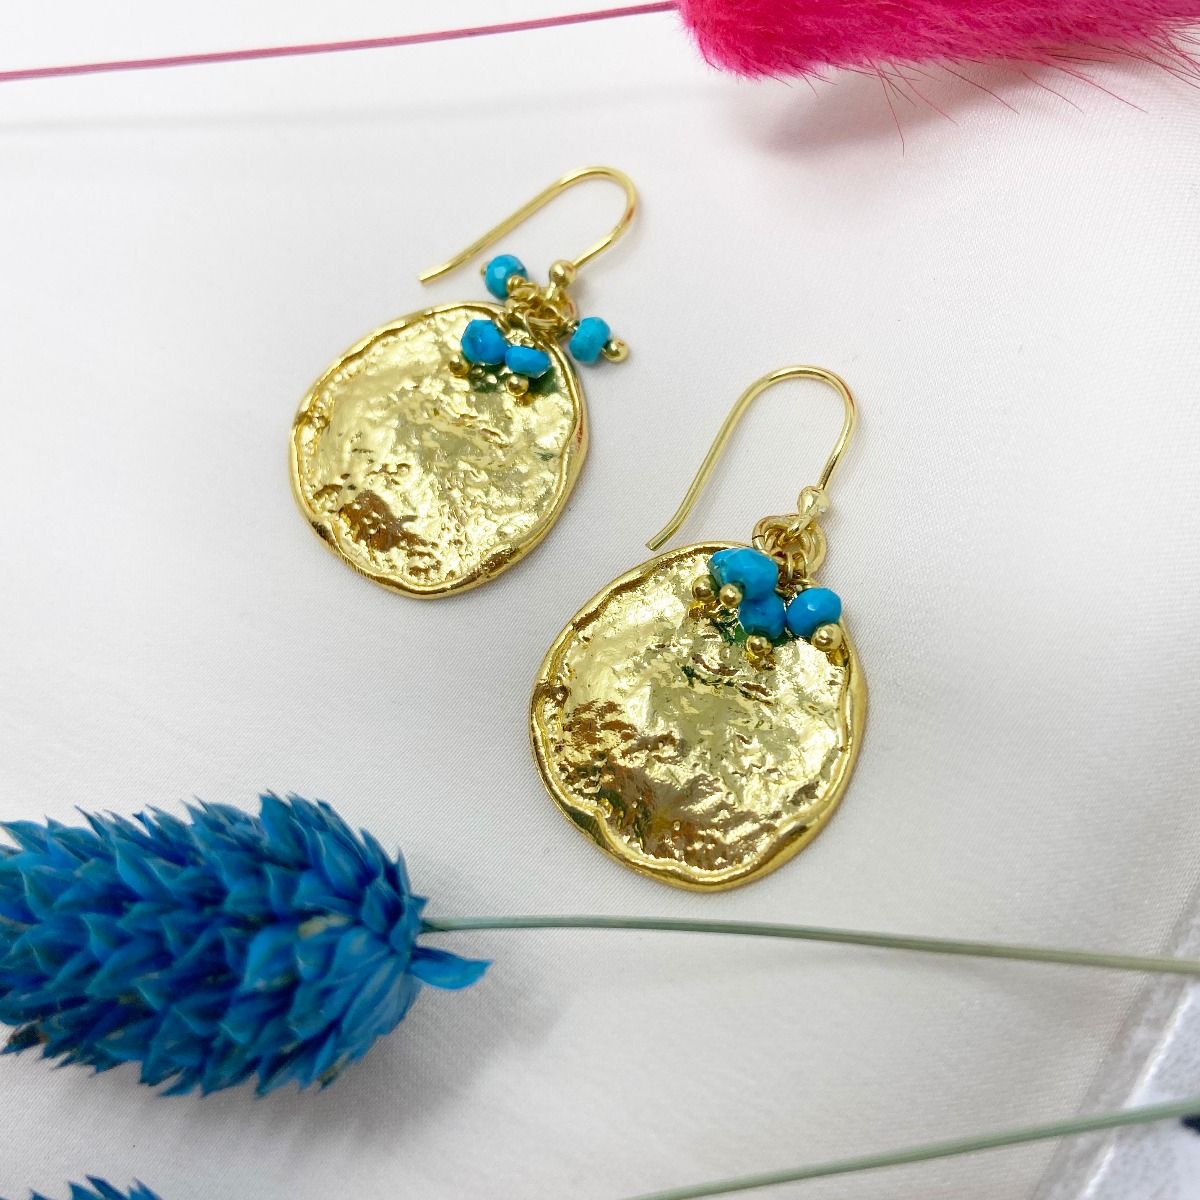 Gold and turqoise earrings